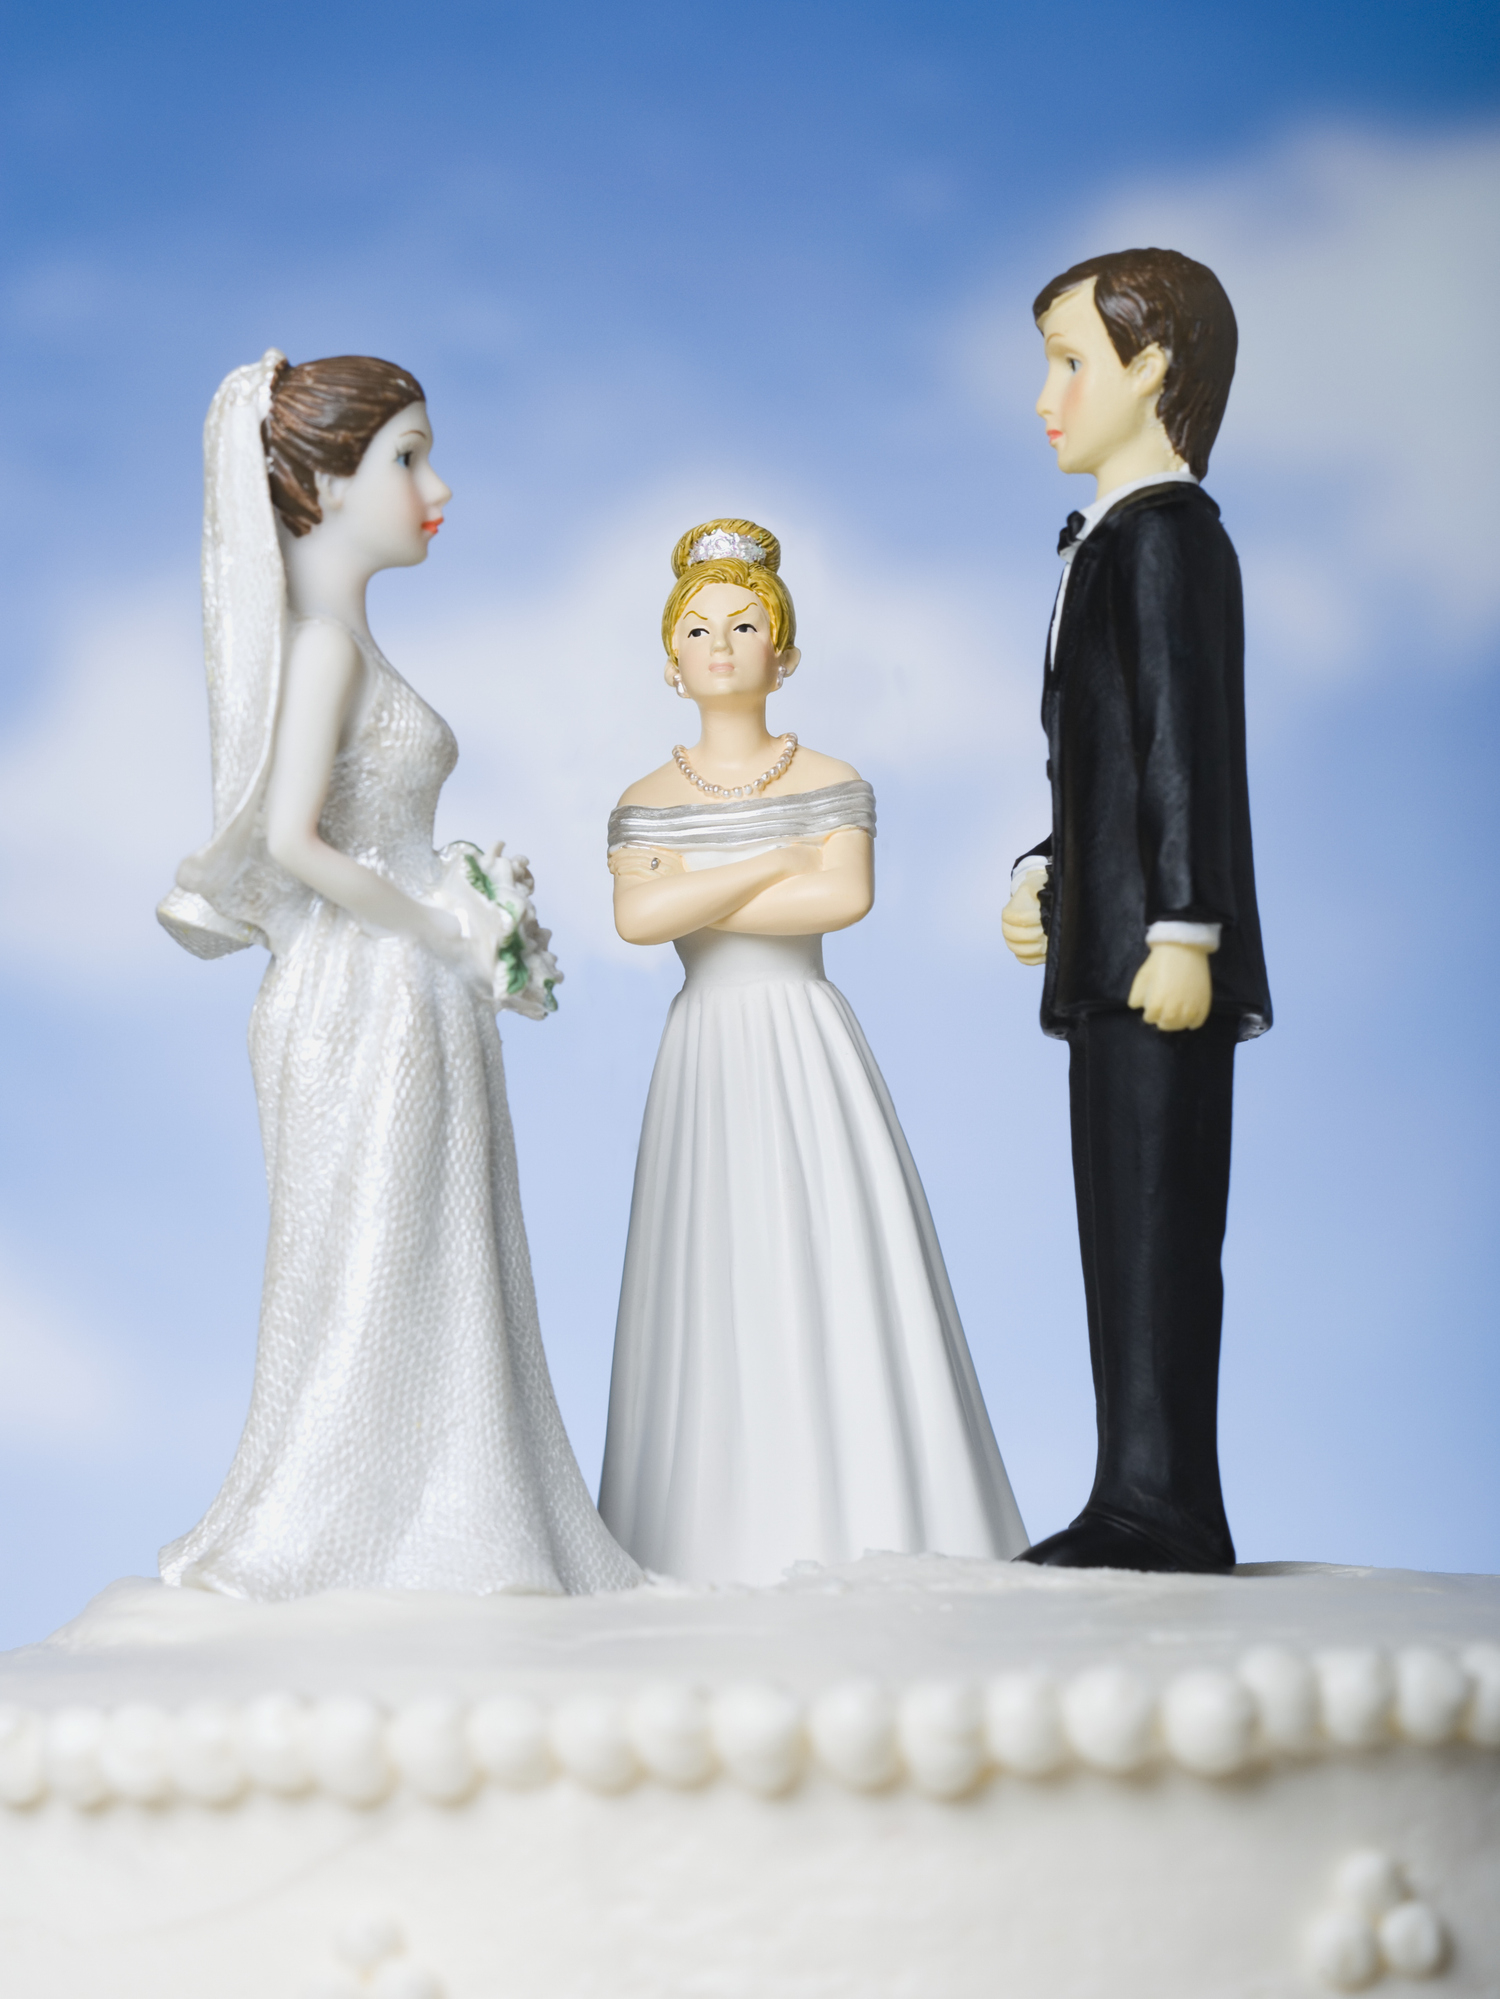 Wedding cake topper with a bride and groom figurine and an upset second bride figurine